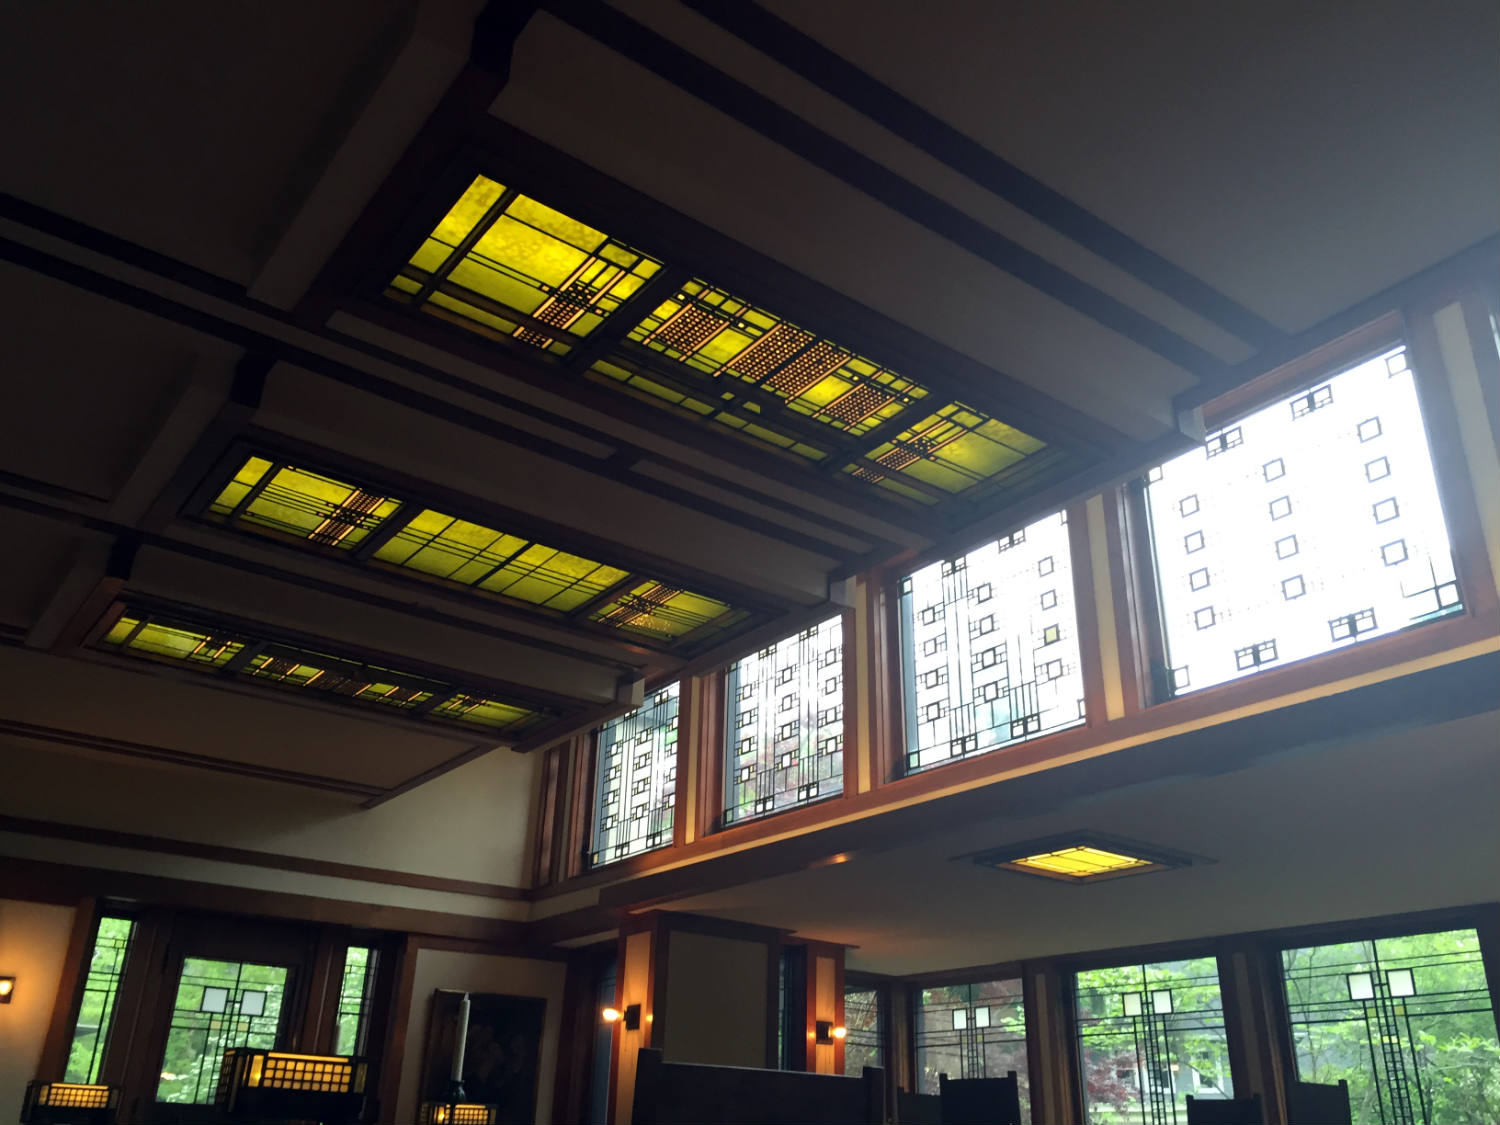 Ceiling Lights and Windows in the Dining Room